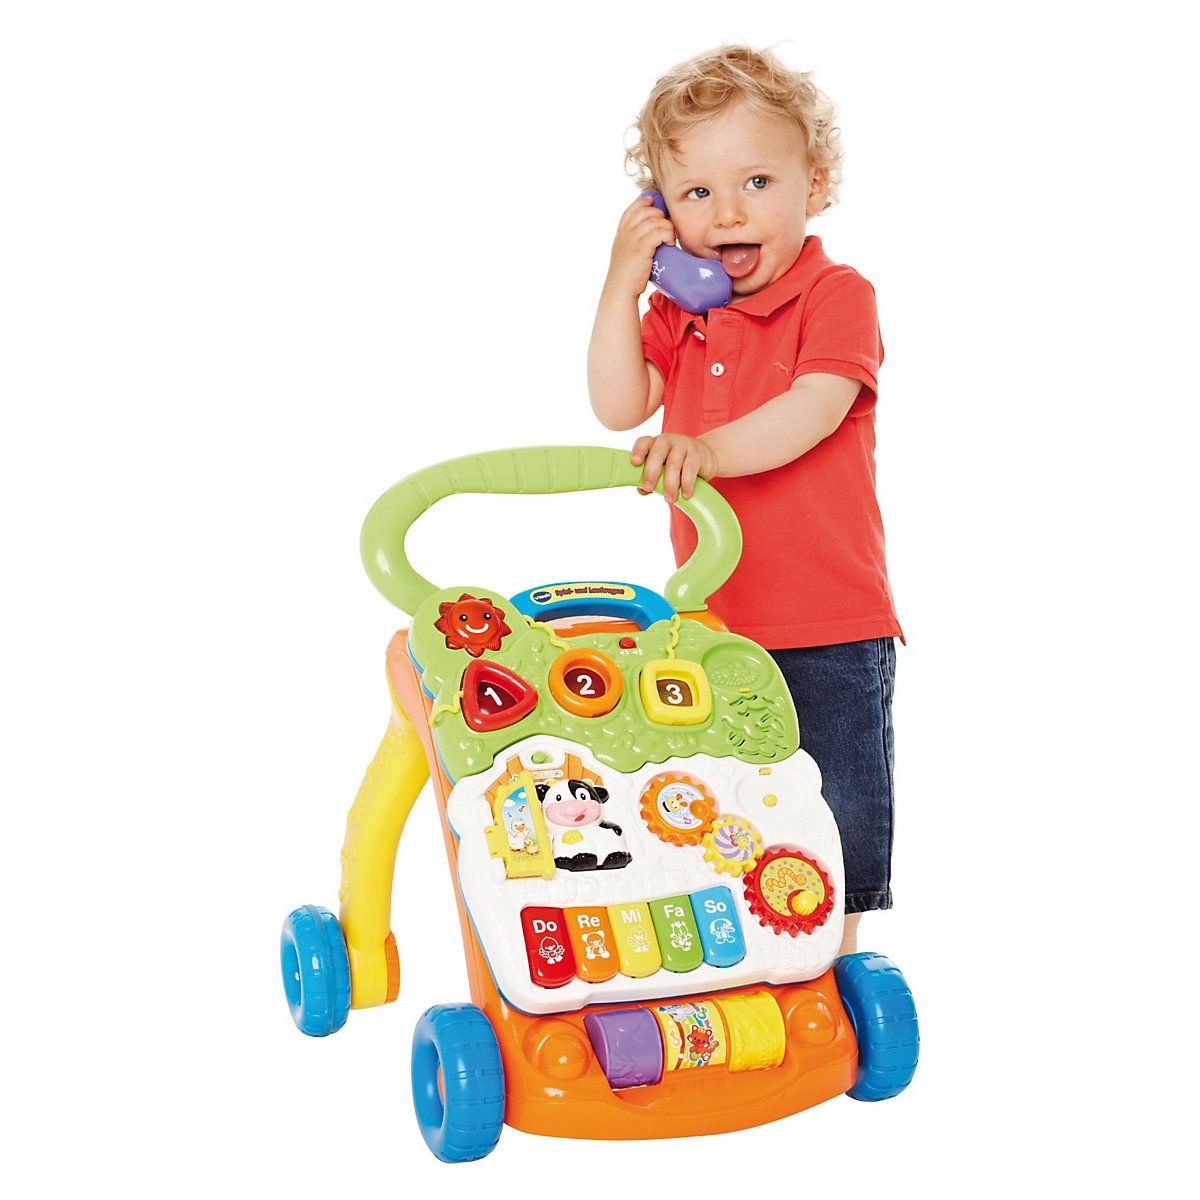 Choosing the Right Walker for Your Child's Needs: Features to Look For